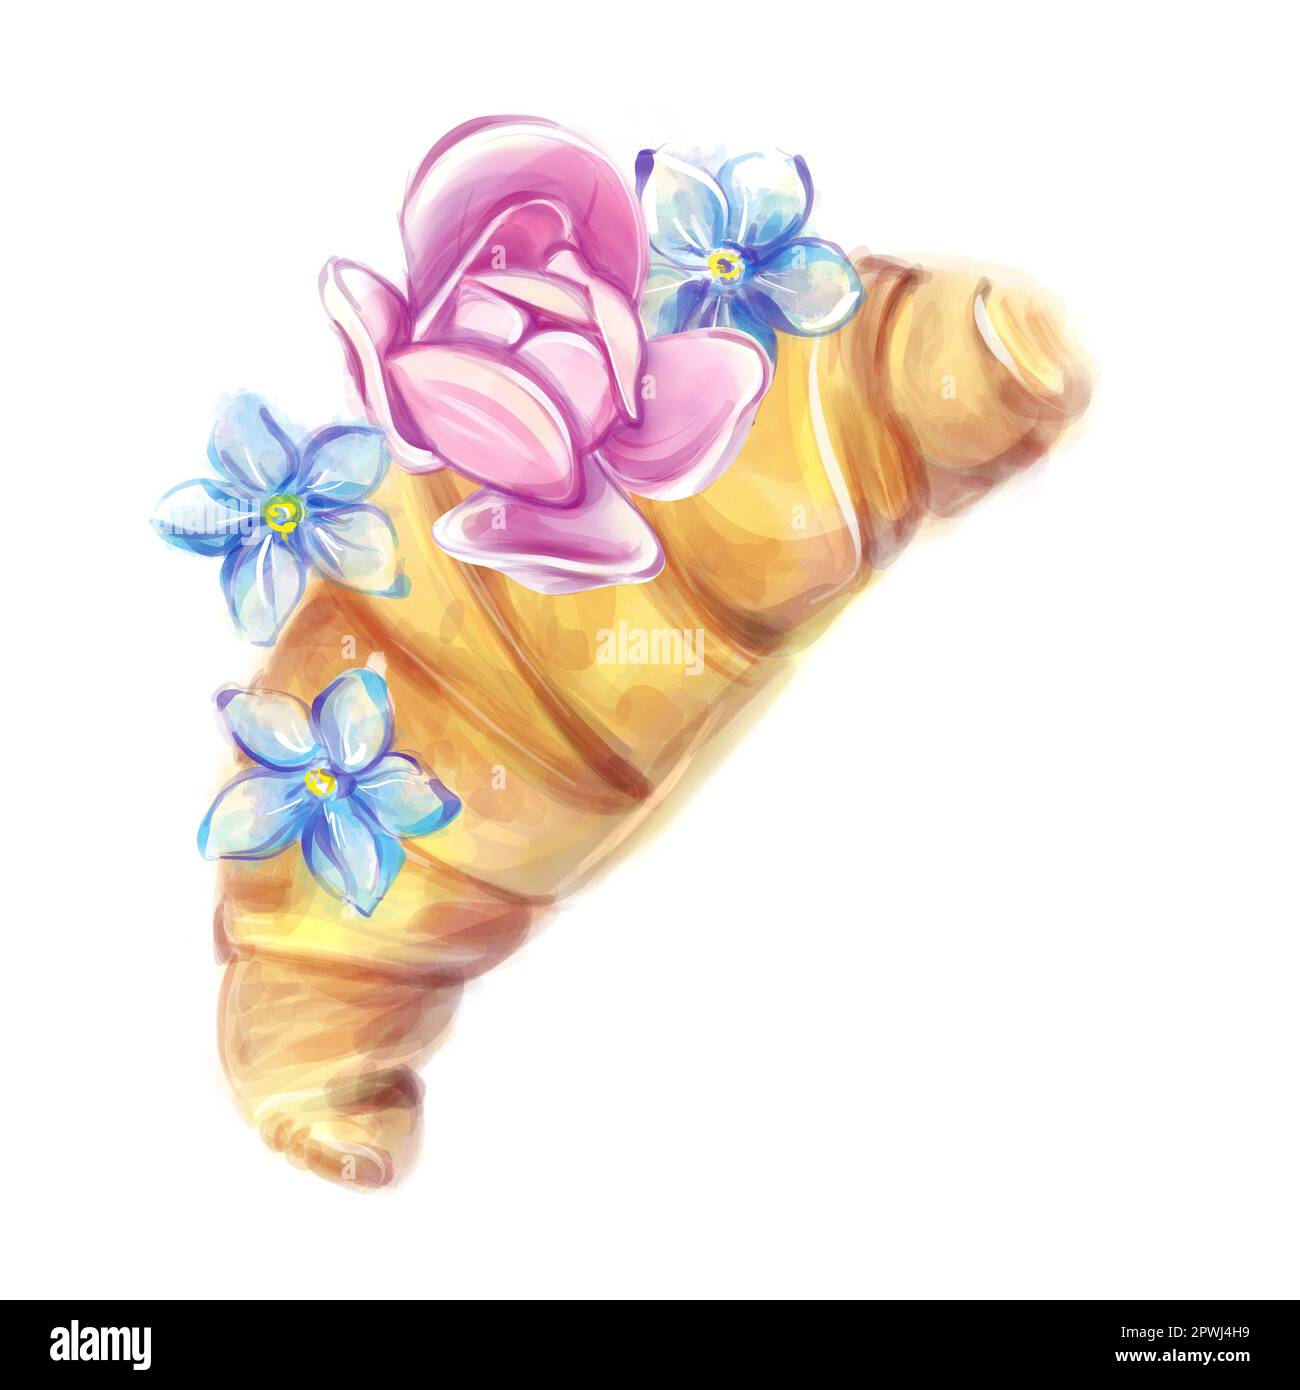 Watercolor croissant with flowers in a romantic style. French breakfas. Bakery clipart. Stock Photo